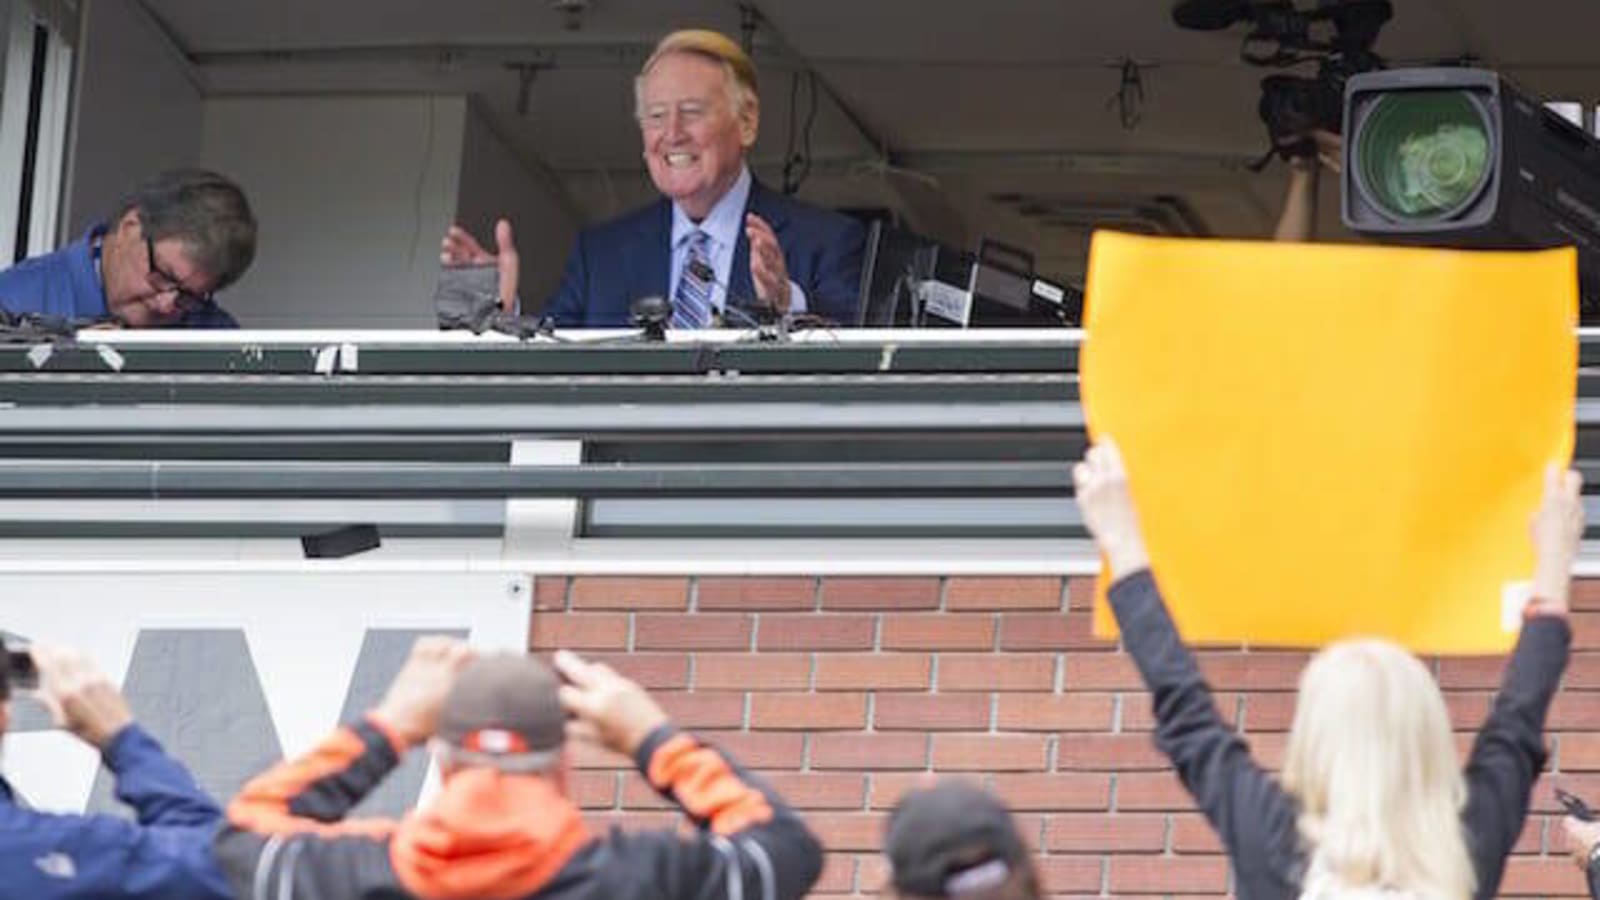 This Day In Dodgers History: Vin Scully Calls Final Game, Steve Finley Clinches NL West With Grand Slam, 4 Players With 30 Home Runs & Sandy Koufax